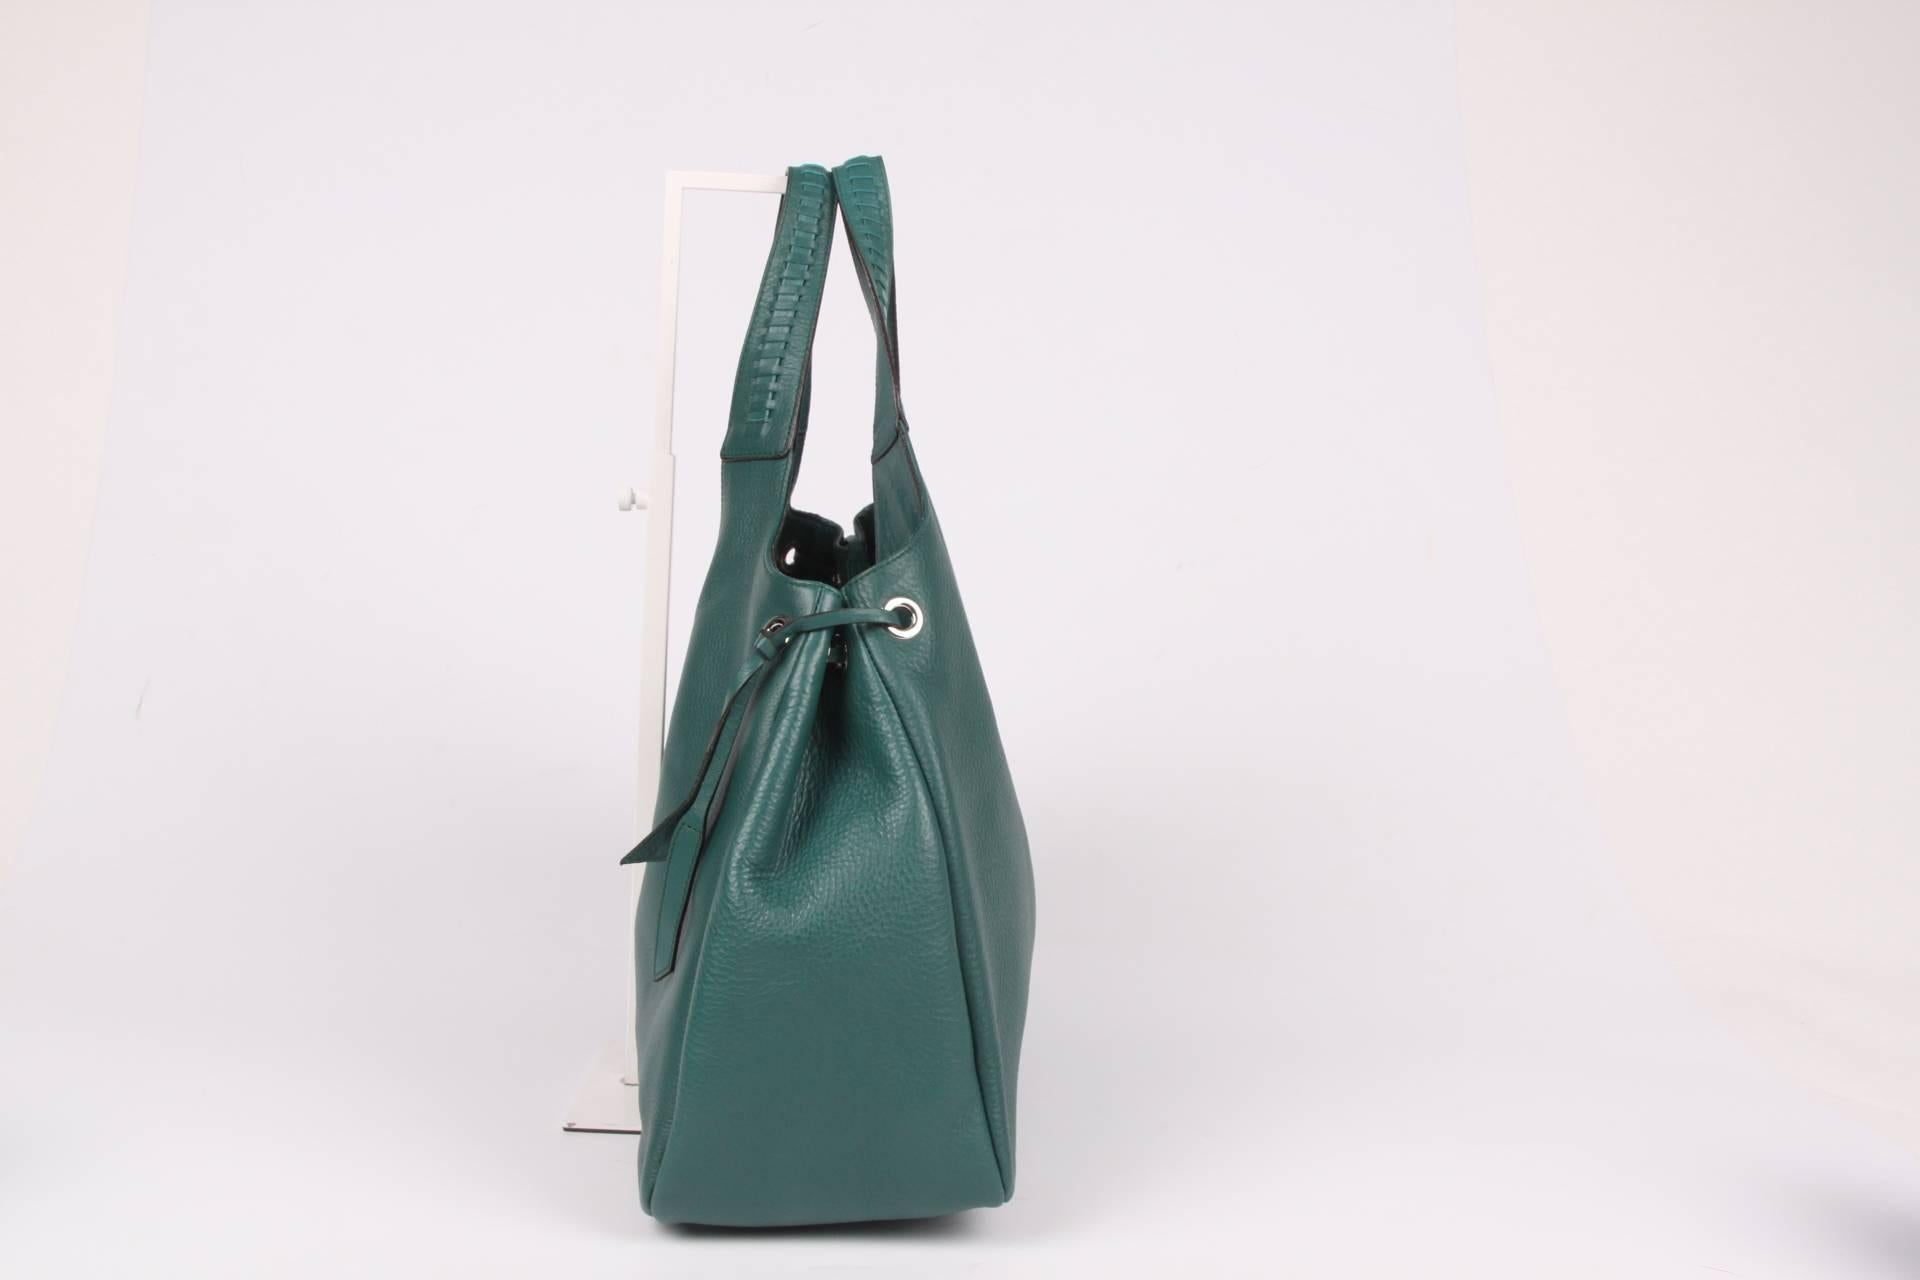 Oh la la, such a beauty! And brand new... A large calfskin leather shoulder bag by Salvatore Ferragamo in emerald green.

The leather of this bag is very supple, braided handles on top and straps on both sides. Very minimalistic silver-tone